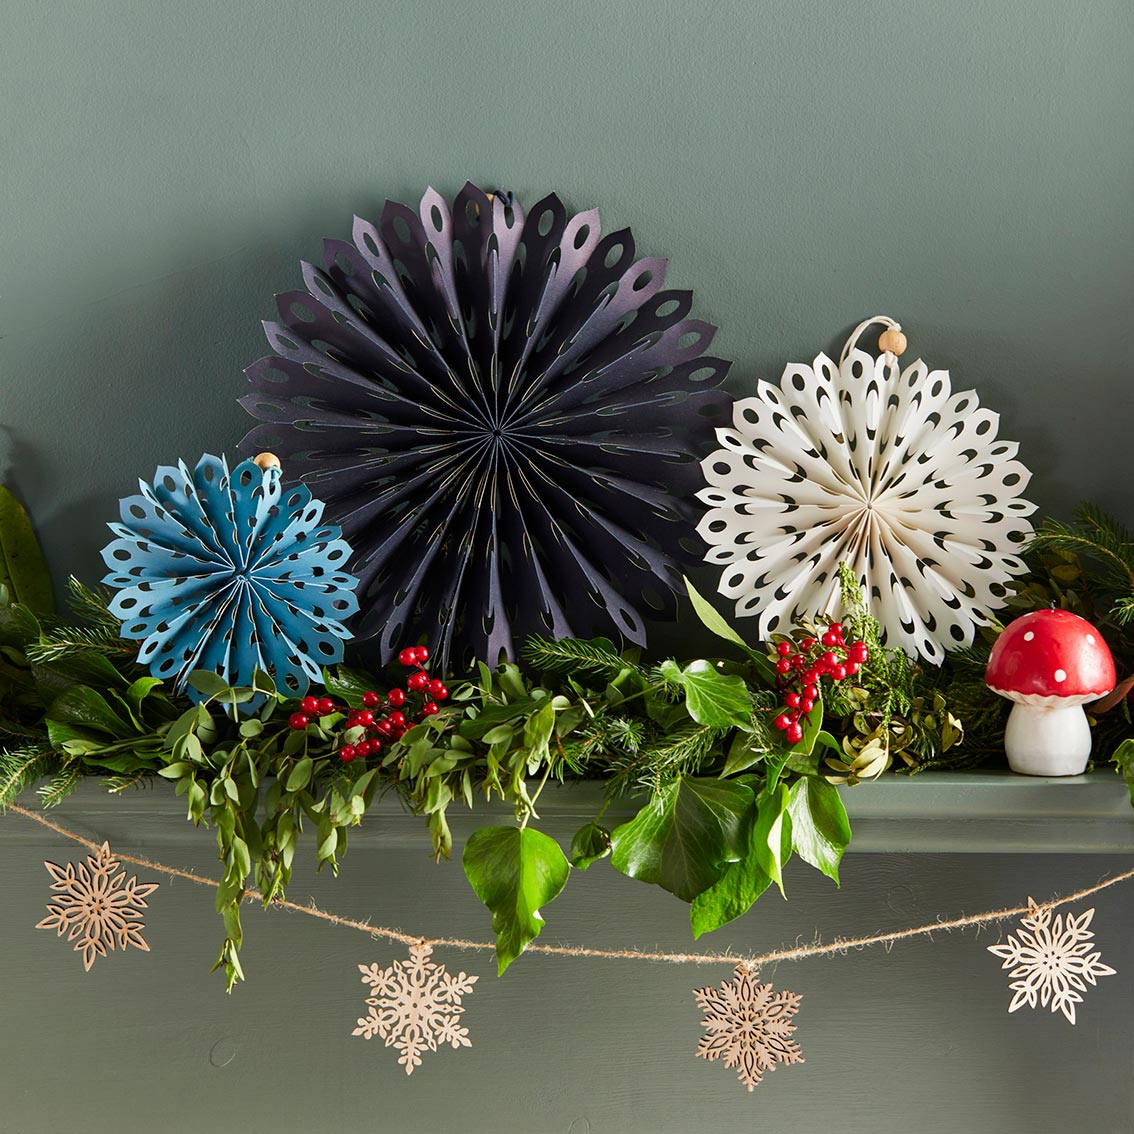 An image of a mantlepiece decorated for Christmas with 3 paper honeycomb fans, some wooden snowflake bunting, a toadstool candle and a foliage garland.